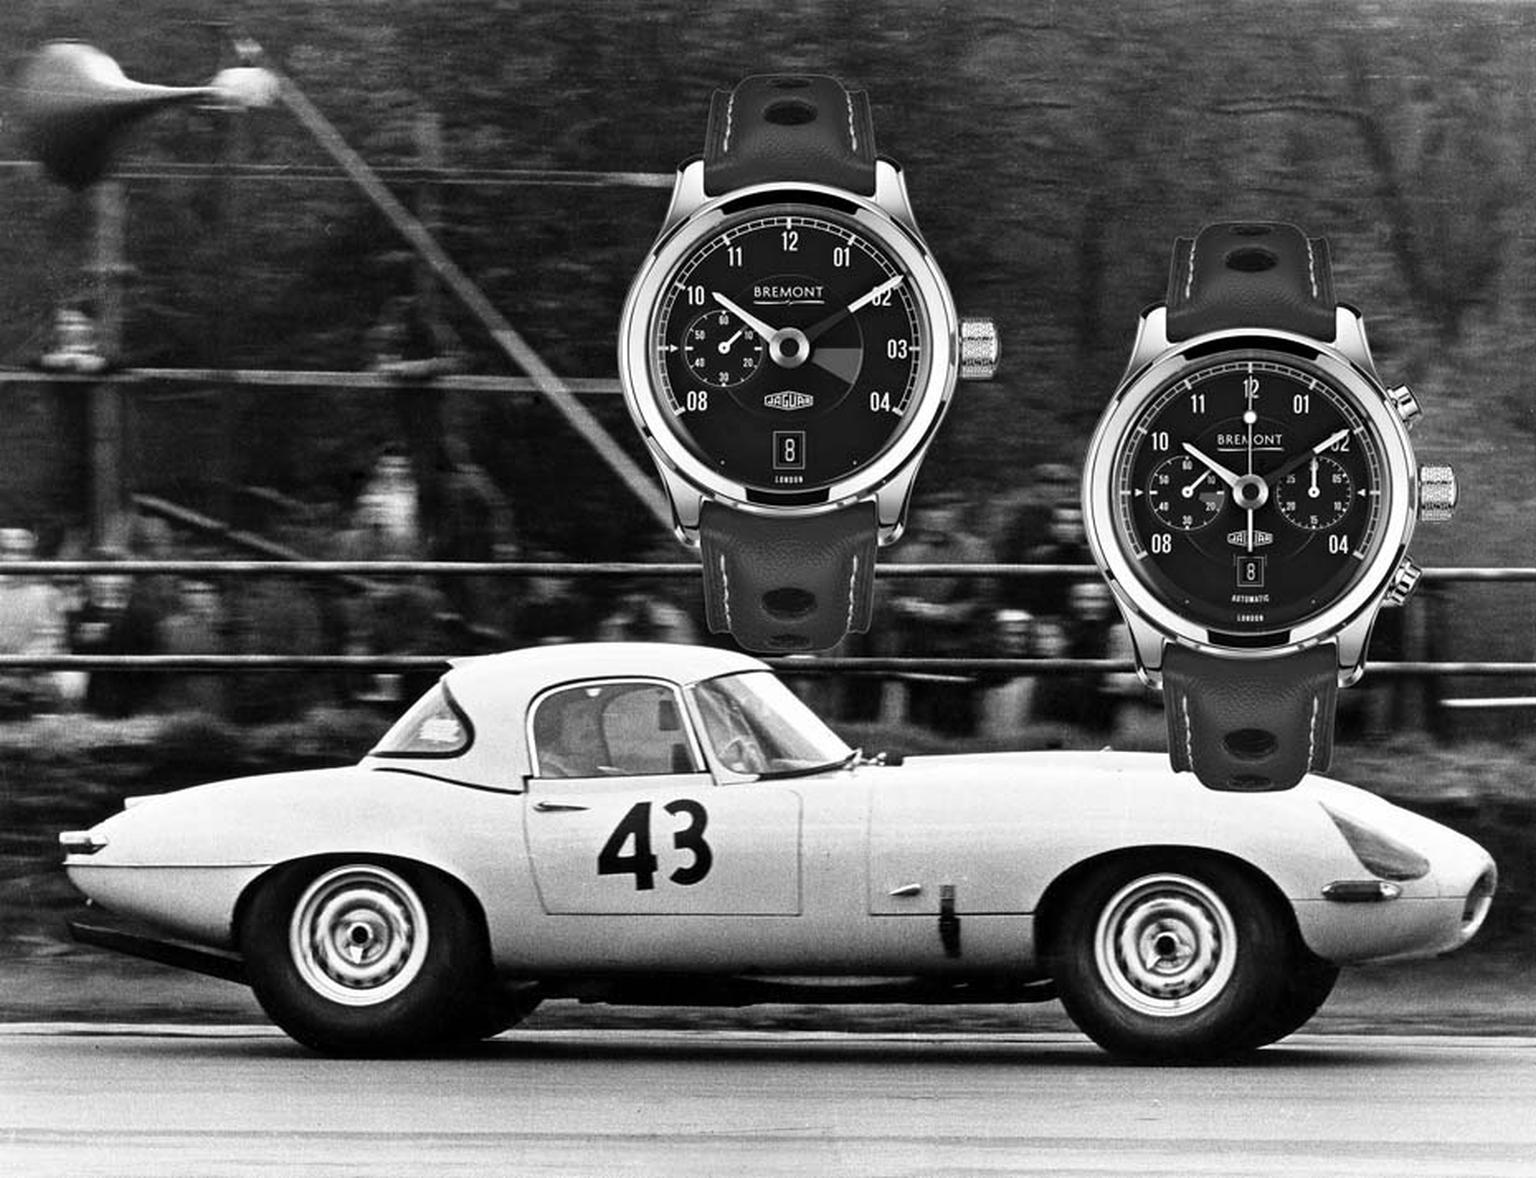 Jaguar and Bremont watches have collaborated on two new timepieces inspired by the mythical Jaguar E-Type car launched in 1961. Both the Jaguar MKI and MKII watches recreate motifs from the dashboard of the Jaguar's speedometer and rev counter.